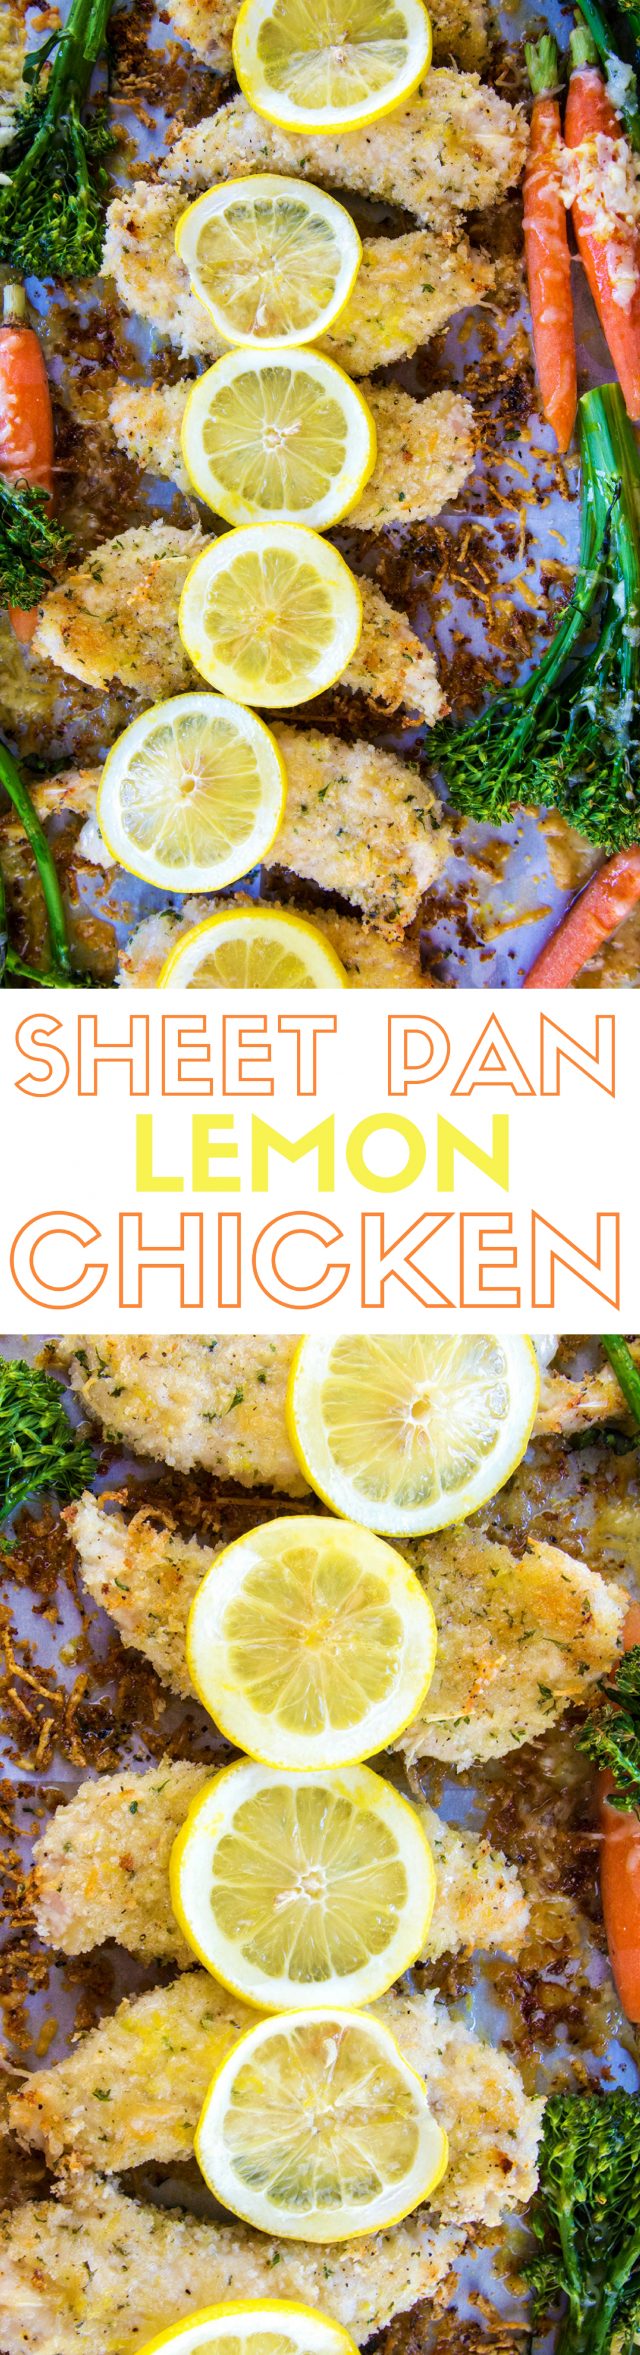 One Sheet Pan Lemon Parmesan Chicken & Vegetables Recipe - Lemon parmesan chicken, covered a light panko crust and roasted vegetables. The best part? It's made on one sheet pan.